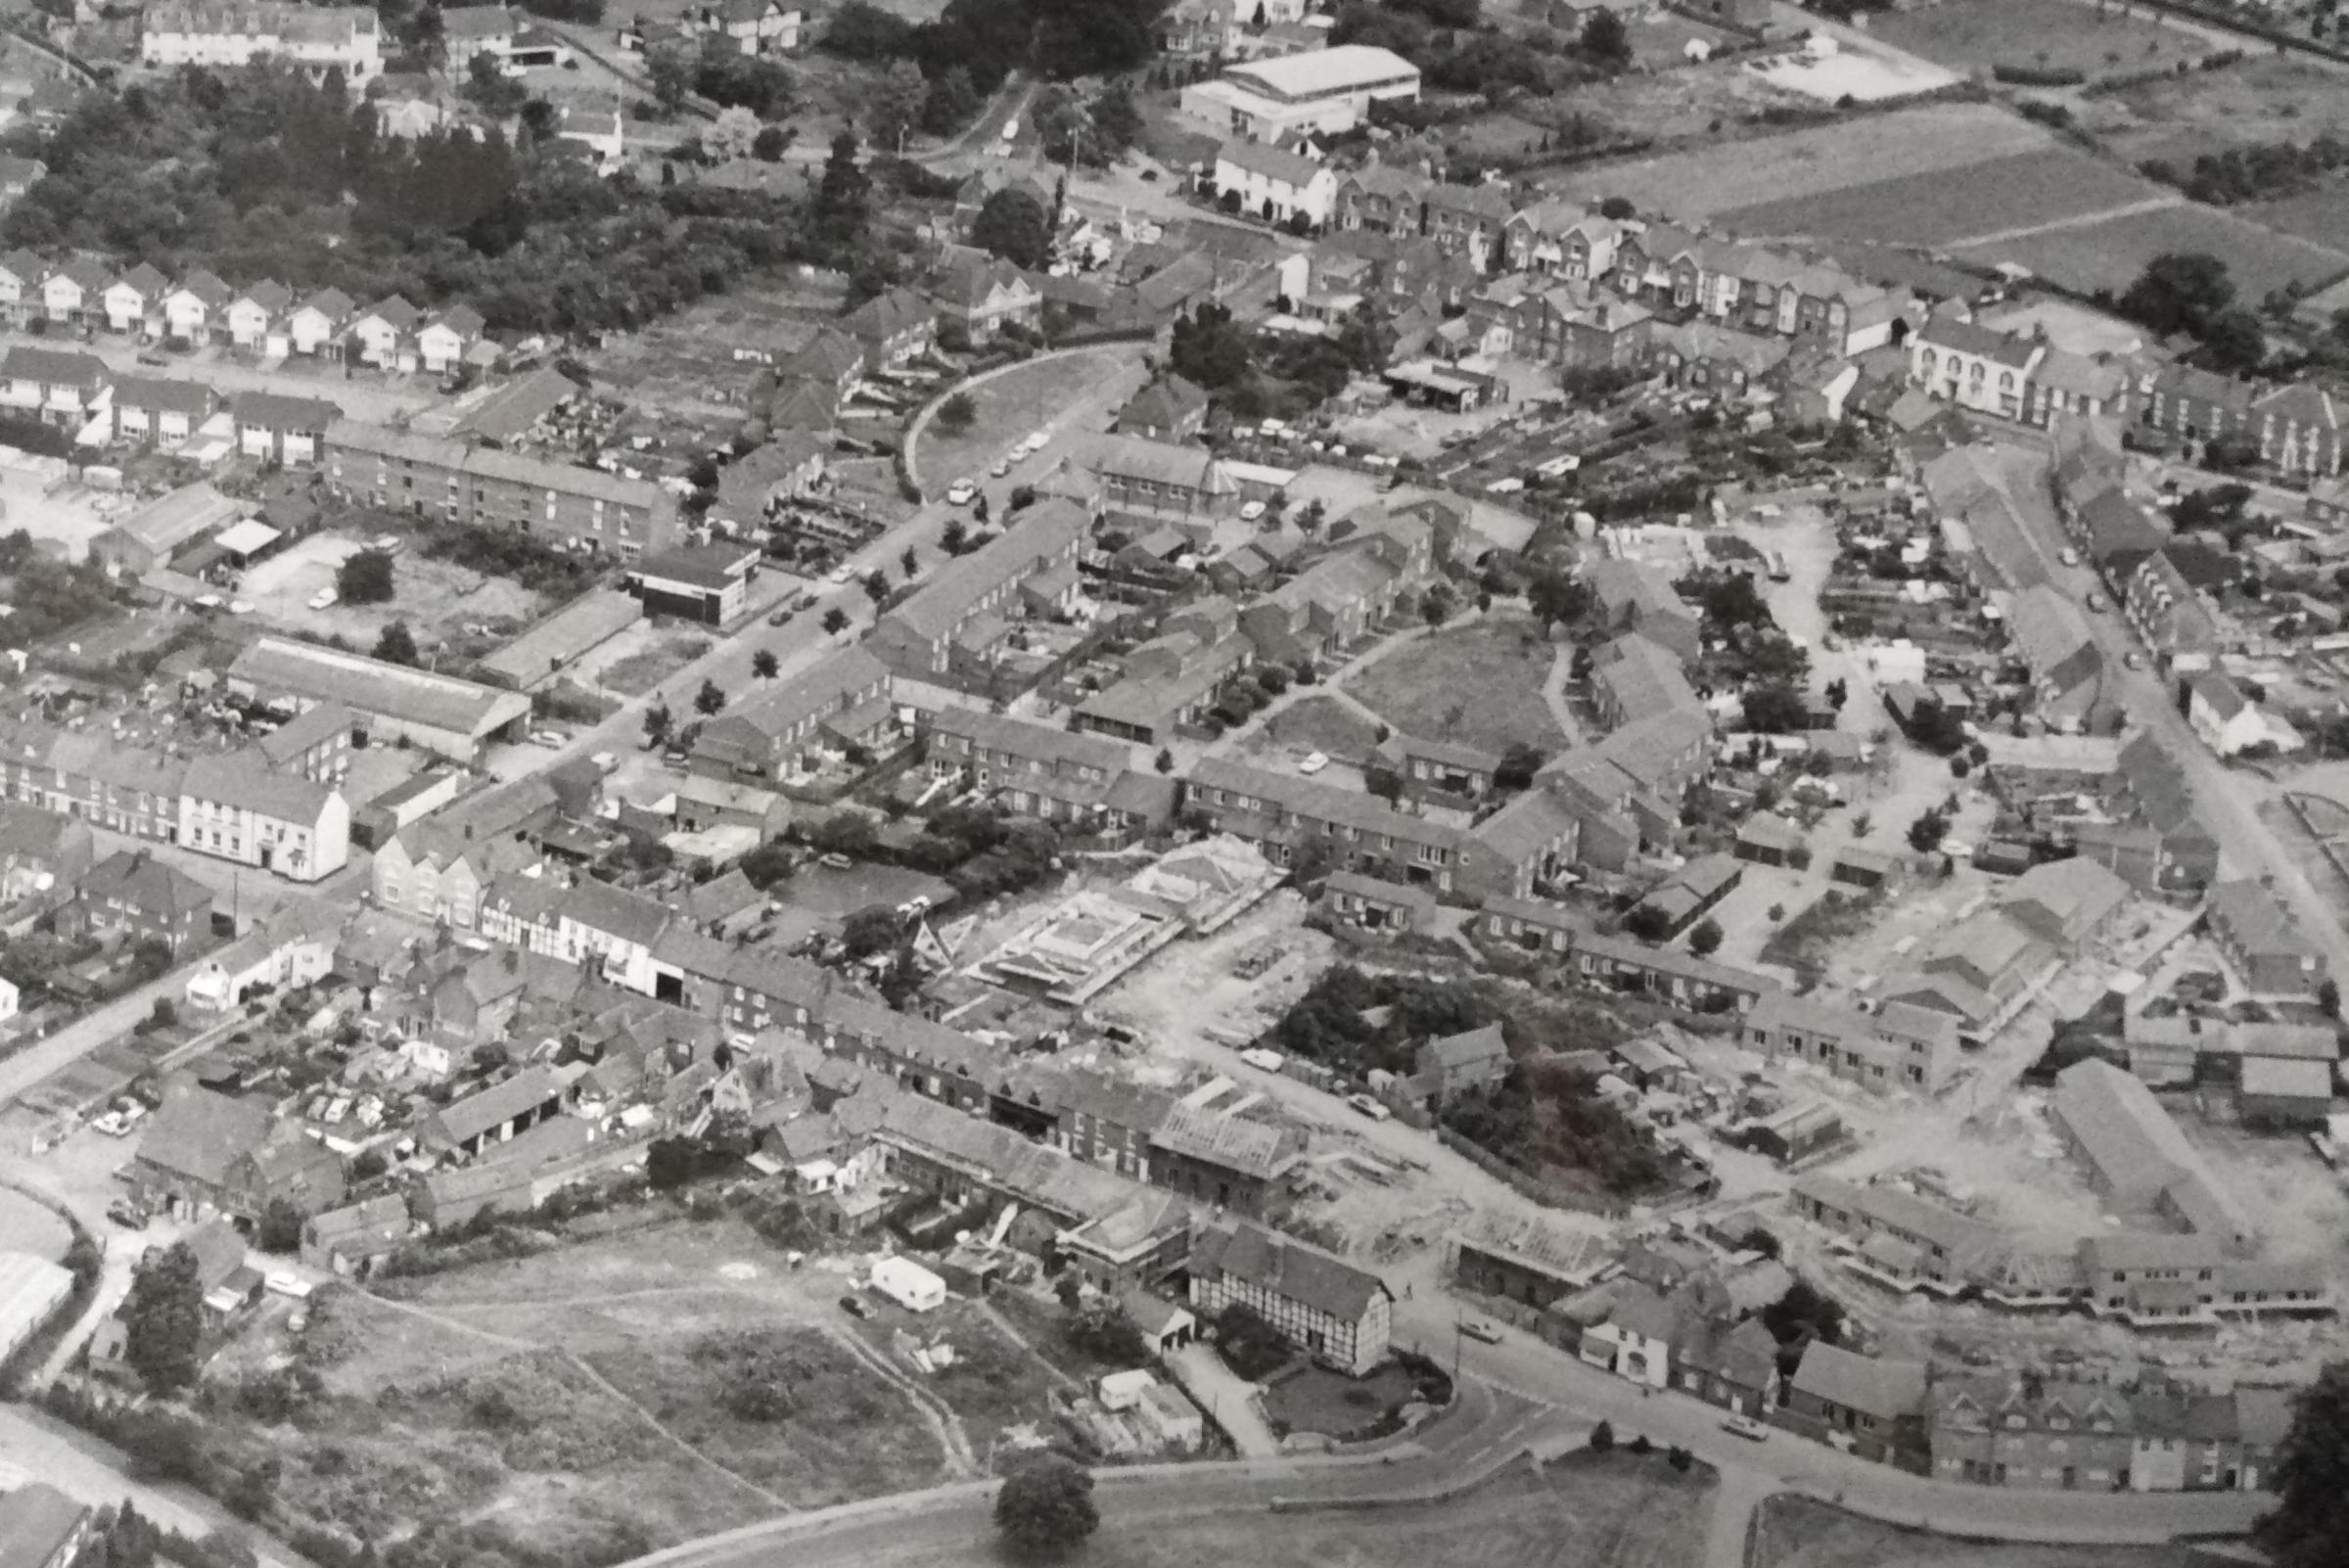 This aerial picture was taken in July 1979 and shows a view of the renovations and construction around Newlands in Pershore